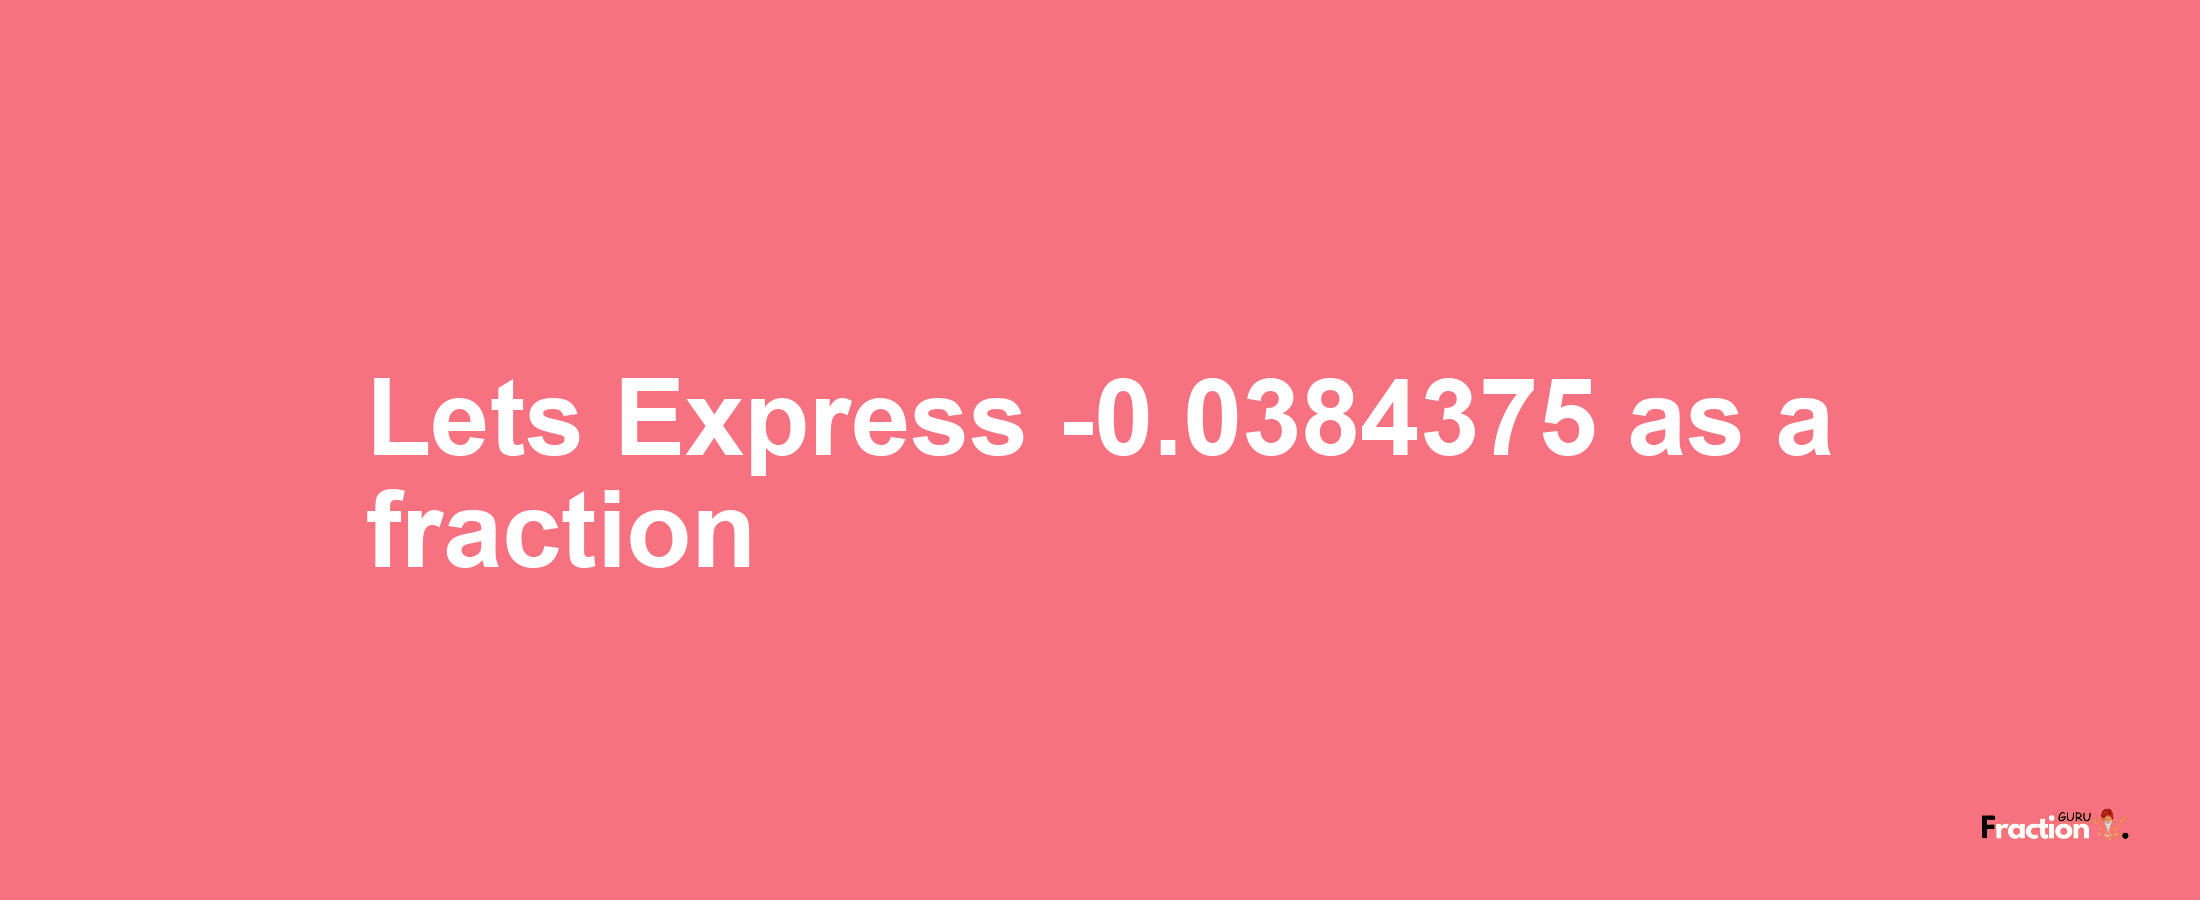 Lets Express -0.0384375 as afraction